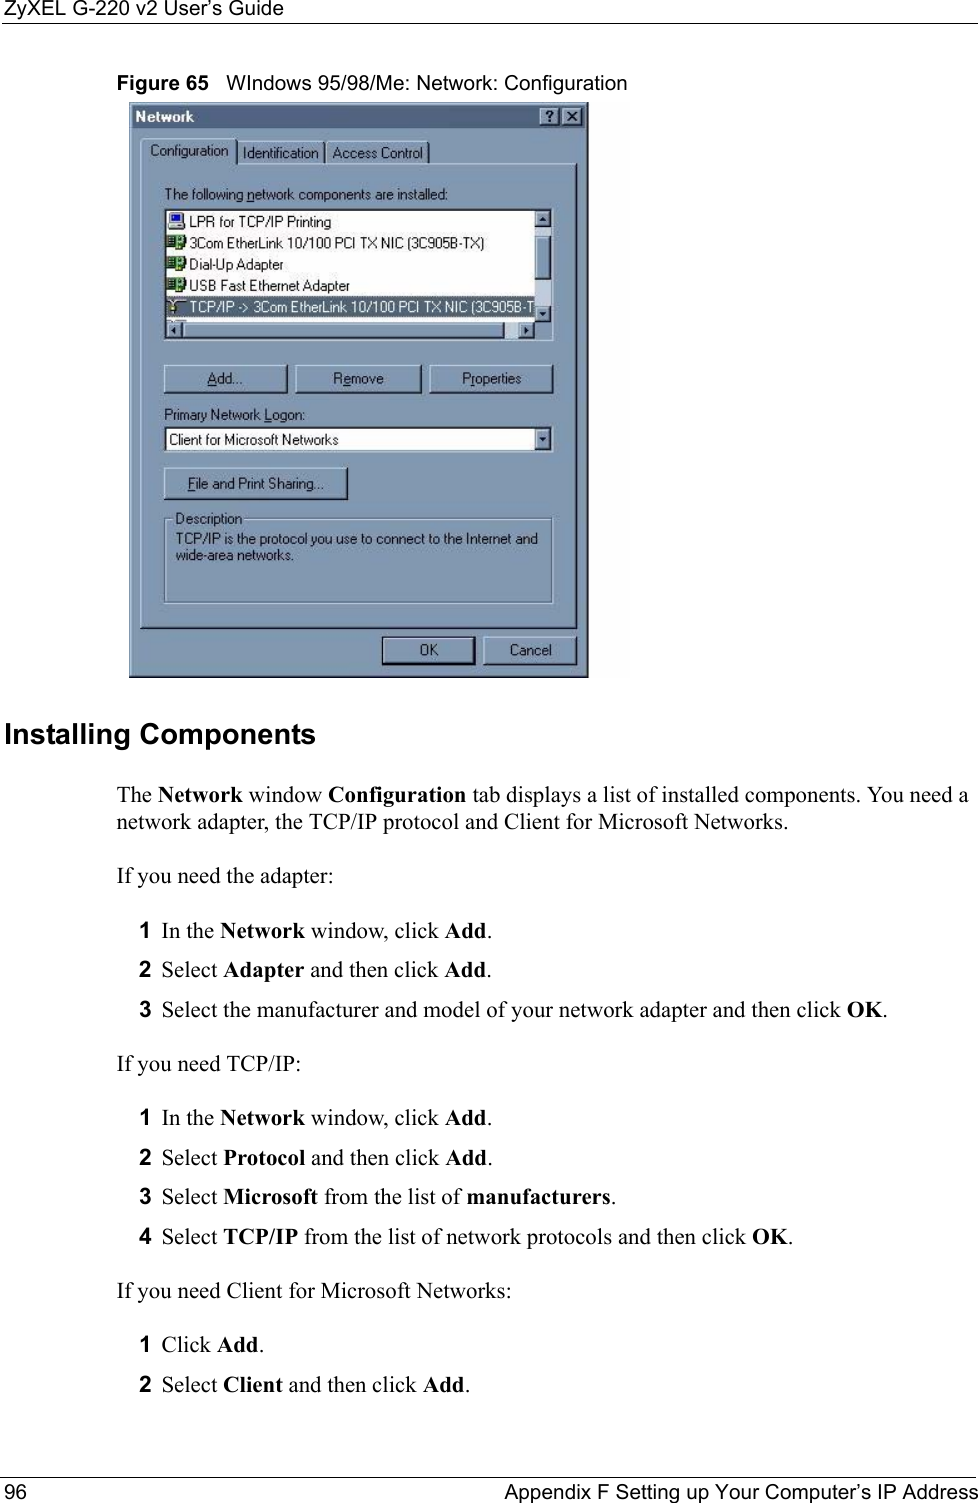 ZyXEL G-220 v2 User’s Guide96 Appendix F Setting up Your Computer’s IP AddressFigure 65   WIndows 95/98/Me: Network: ConfigurationInstalling ComponentsThe Network window Configuration tab displays a list of installed components. You need a network adapter, the TCP/IP protocol and Client for Microsoft Networks.If you need the adapter:1In the Network window, click Add.2Select Adapter and then click Add.3Select the manufacturer and model of your network adapter and then click OK.If you need TCP/IP:1In the Network window, click Add.2Select Protocol and then click Add.3Select Microsoft from the list of manufacturers.4Select TCP/IP from the list of network protocols and then click OK.If you need Client for Microsoft Networks:1Click Add.2Select Client and then click Add.